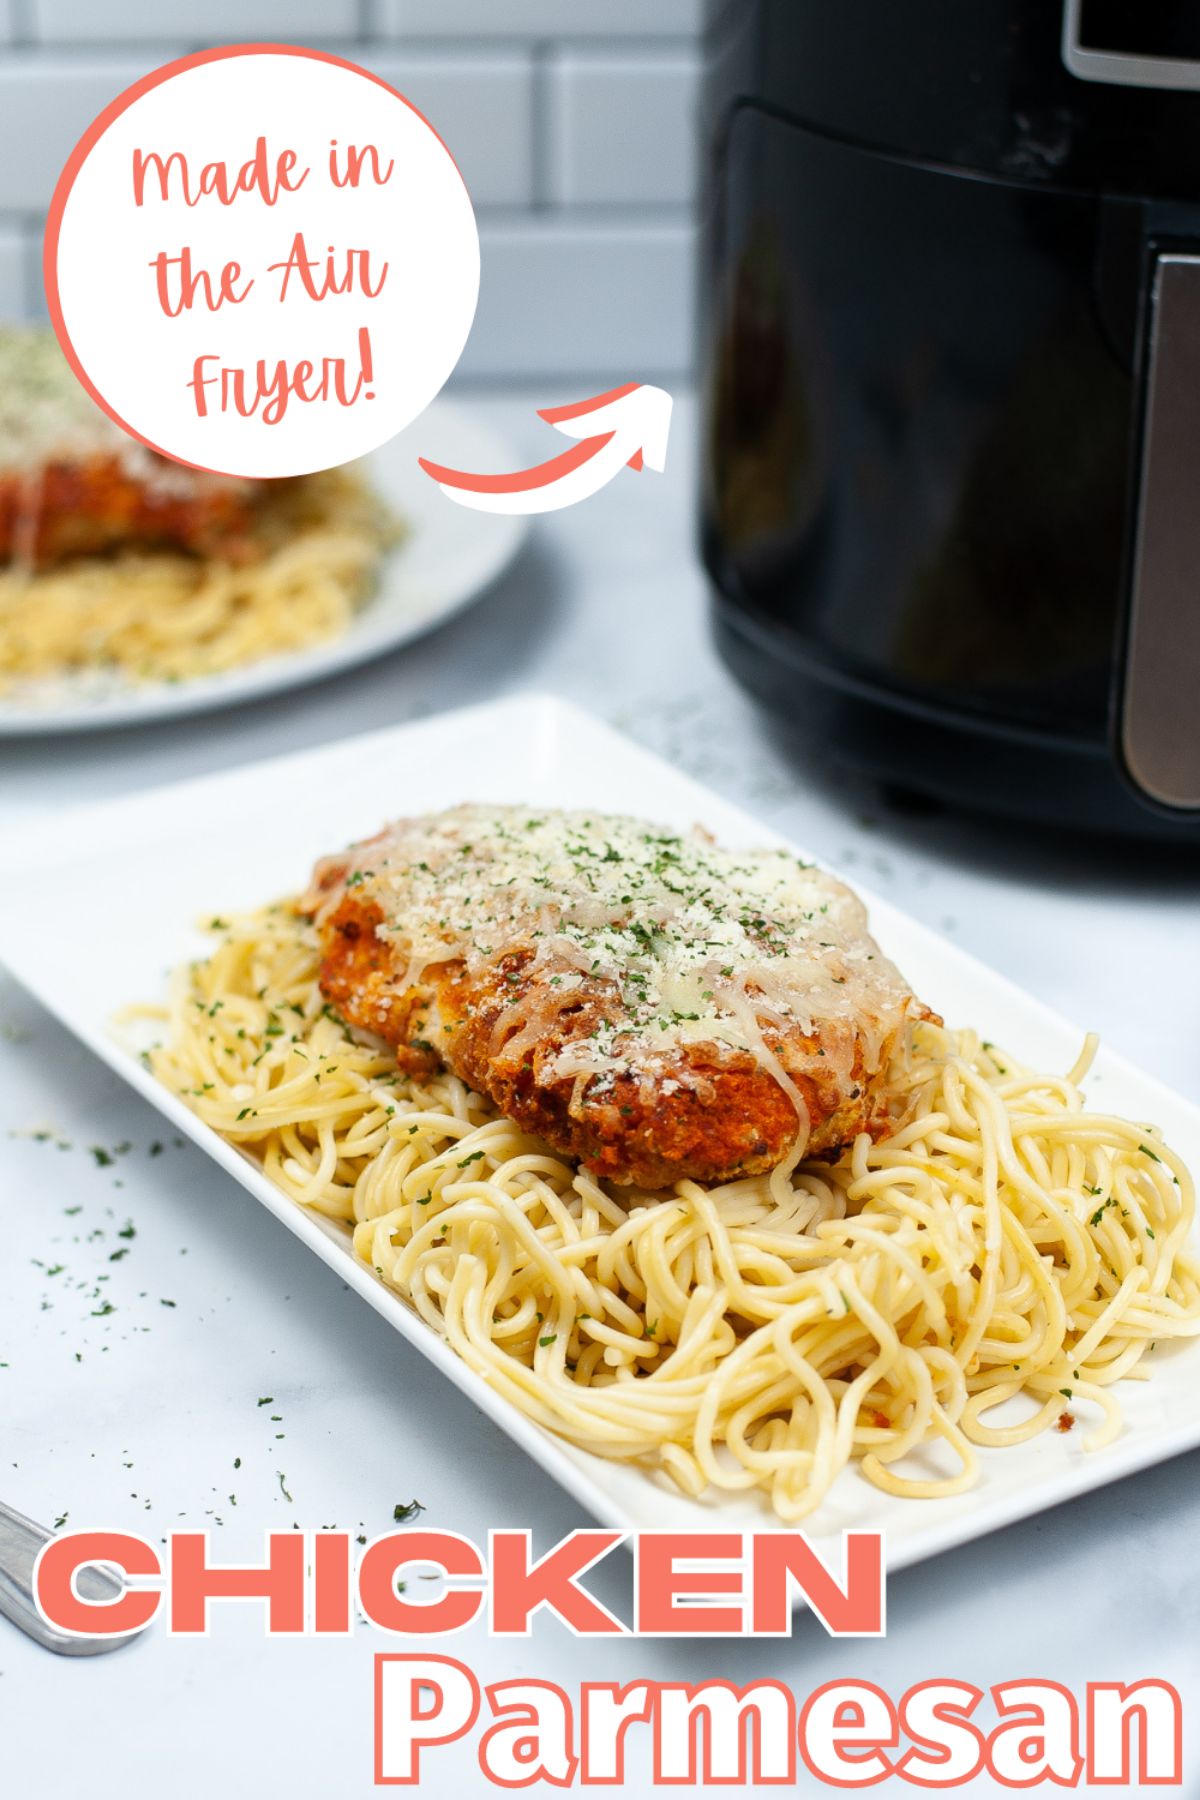 Air Fryer Chicken Parmesan on top of pasta on a white platter with a text bubble above it saying "Made in the Air Fryer" and a printed text below it saying "Chicken Parmesan"